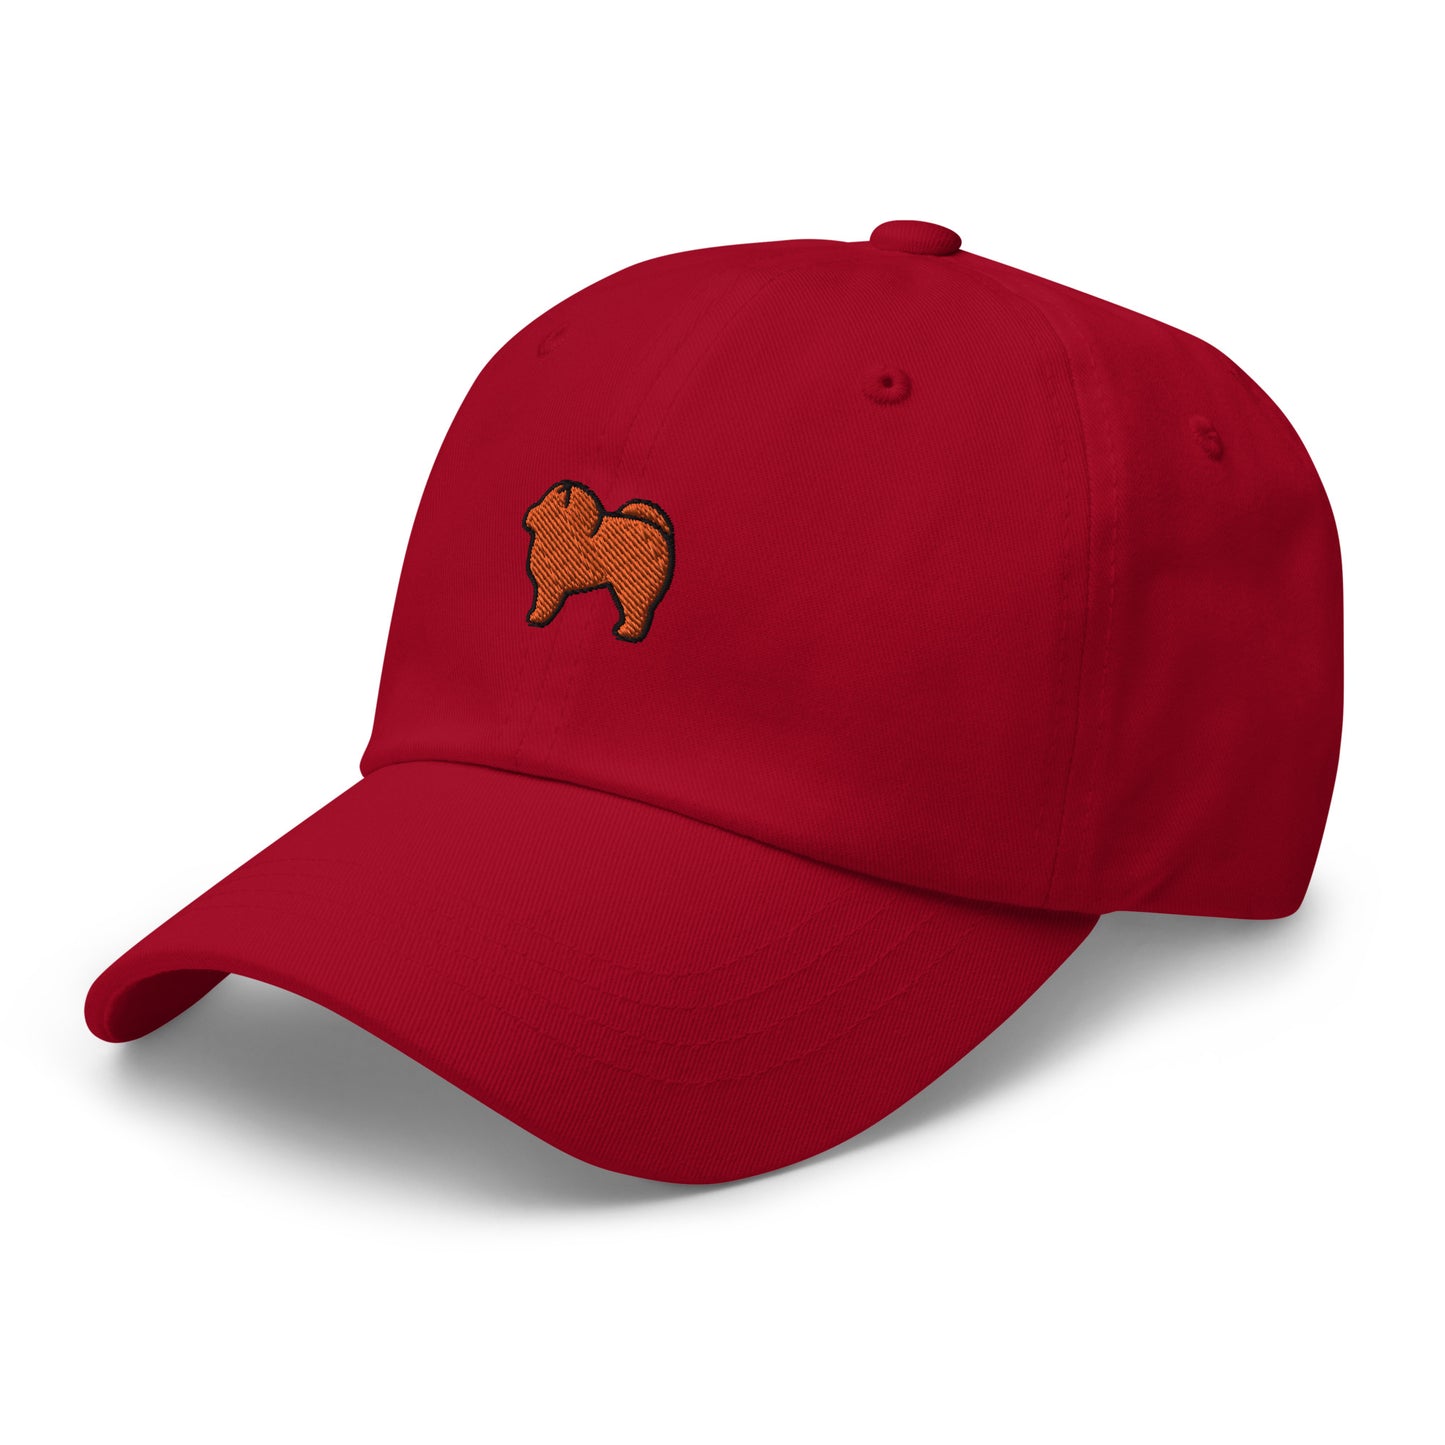 Chow Chow Dog Embroidered Baseball Cap